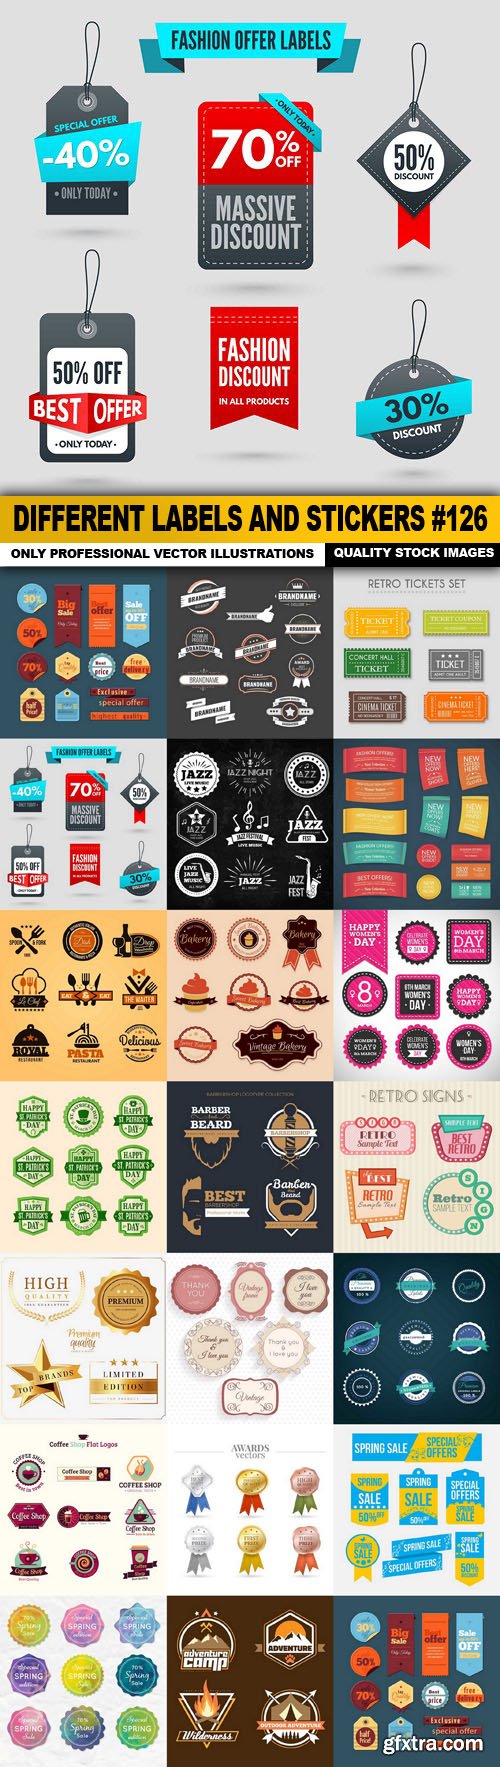 Different Labels And Stickers #126 - 20 Vector